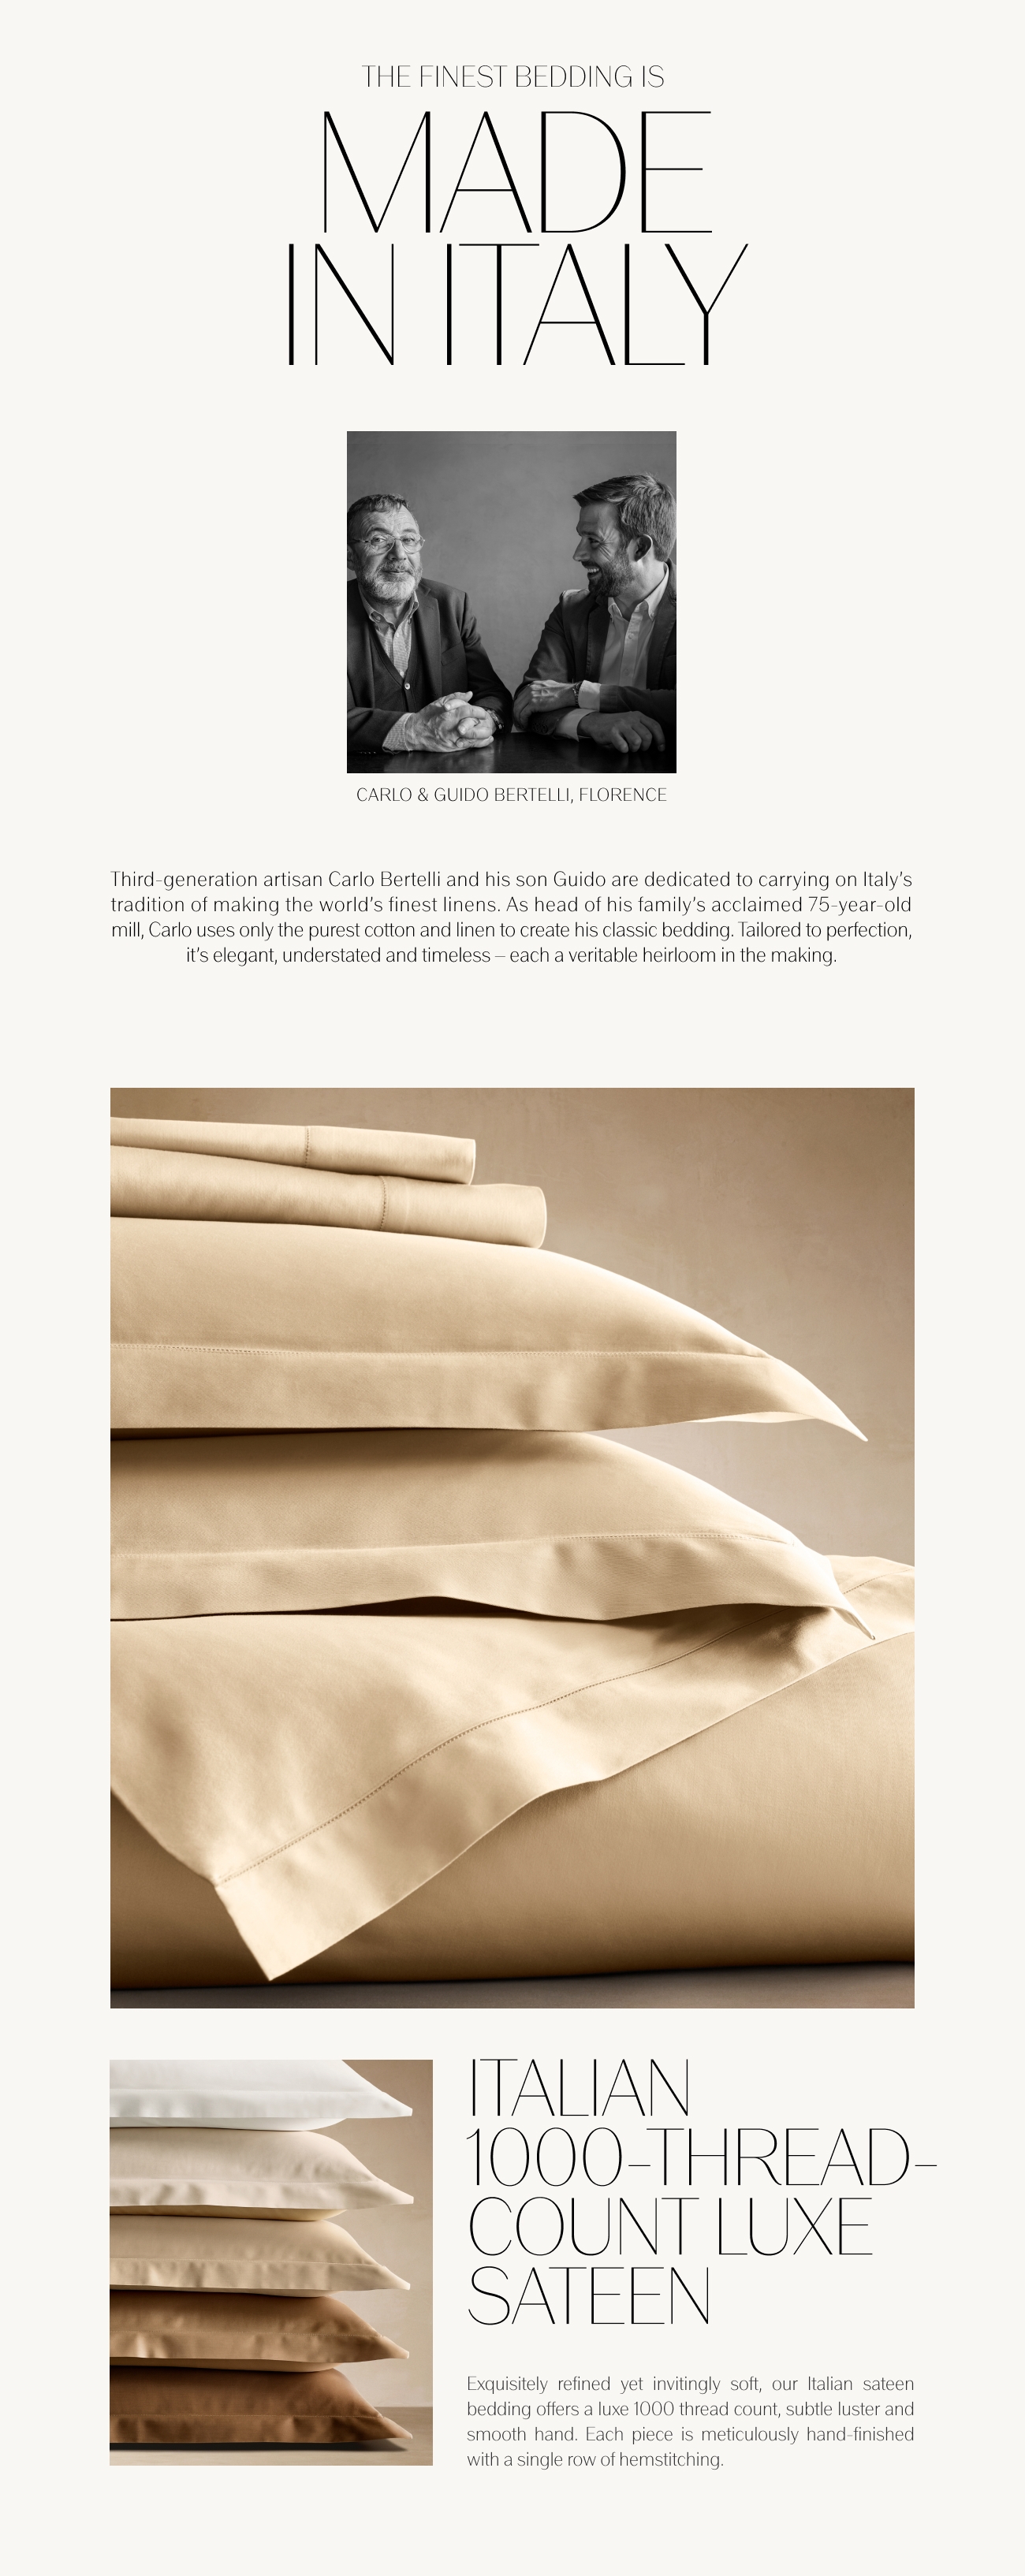 THE FINEST BEDDING IS VIADE INTTALY CARLO GUIDO BERTELLI, FLORENCE Third-generation artisan Carlo Bertelli and his son Guido are dedicated to carrying on Italys tradition of making the world's finest linens. As head of his family's acclaimed 75-year-old mill, Carlo uses only the purest cotton and linen to create his classic bedding. Tailored to perfection, it's elegant, understated and timeless each a veritable heirloom in the making. HALIAN 1000-1HREAD- - COUNT LUXE SATEEN Exquisitely refined yet invitingly soft, our ltalian sateen bedding offers a luxe 1000 thread count, subtle luster and smooth hand. Each piece is meticulously hand-finished with a single row of hemstitching. 